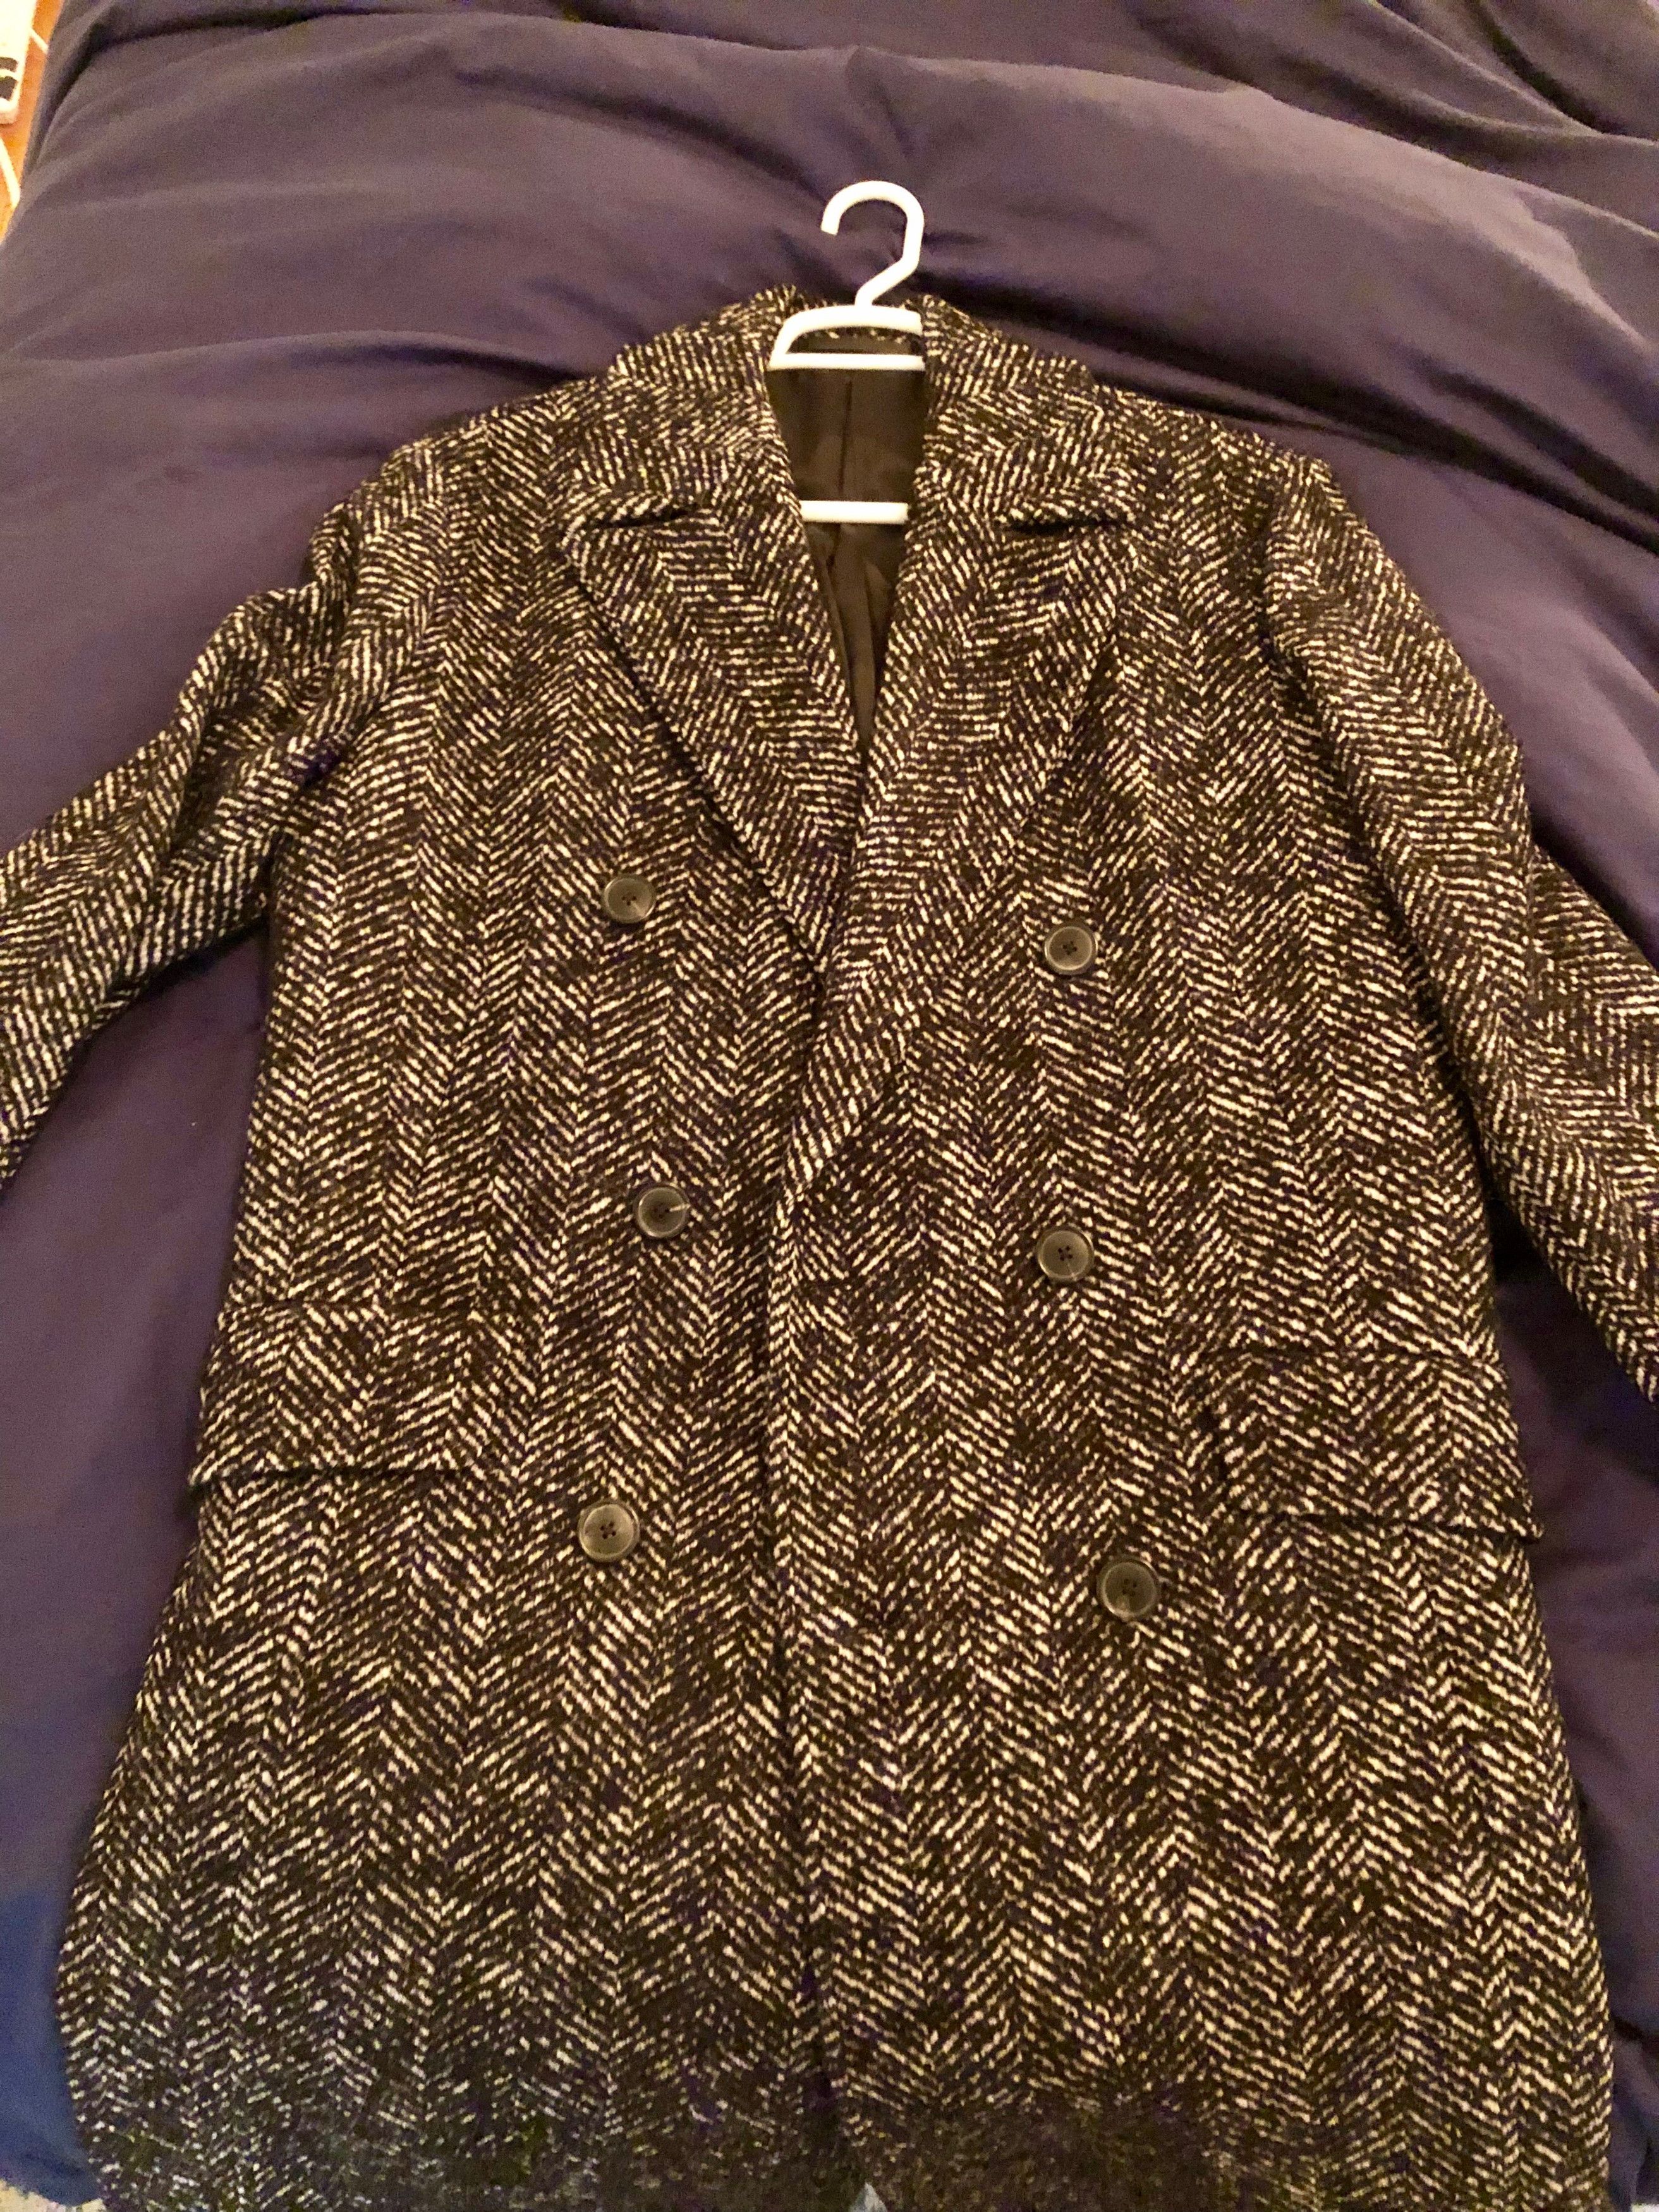 Theory Herringbone Double Breasted Coat Size US M / EU 48-50 / 2 - 2 Preview